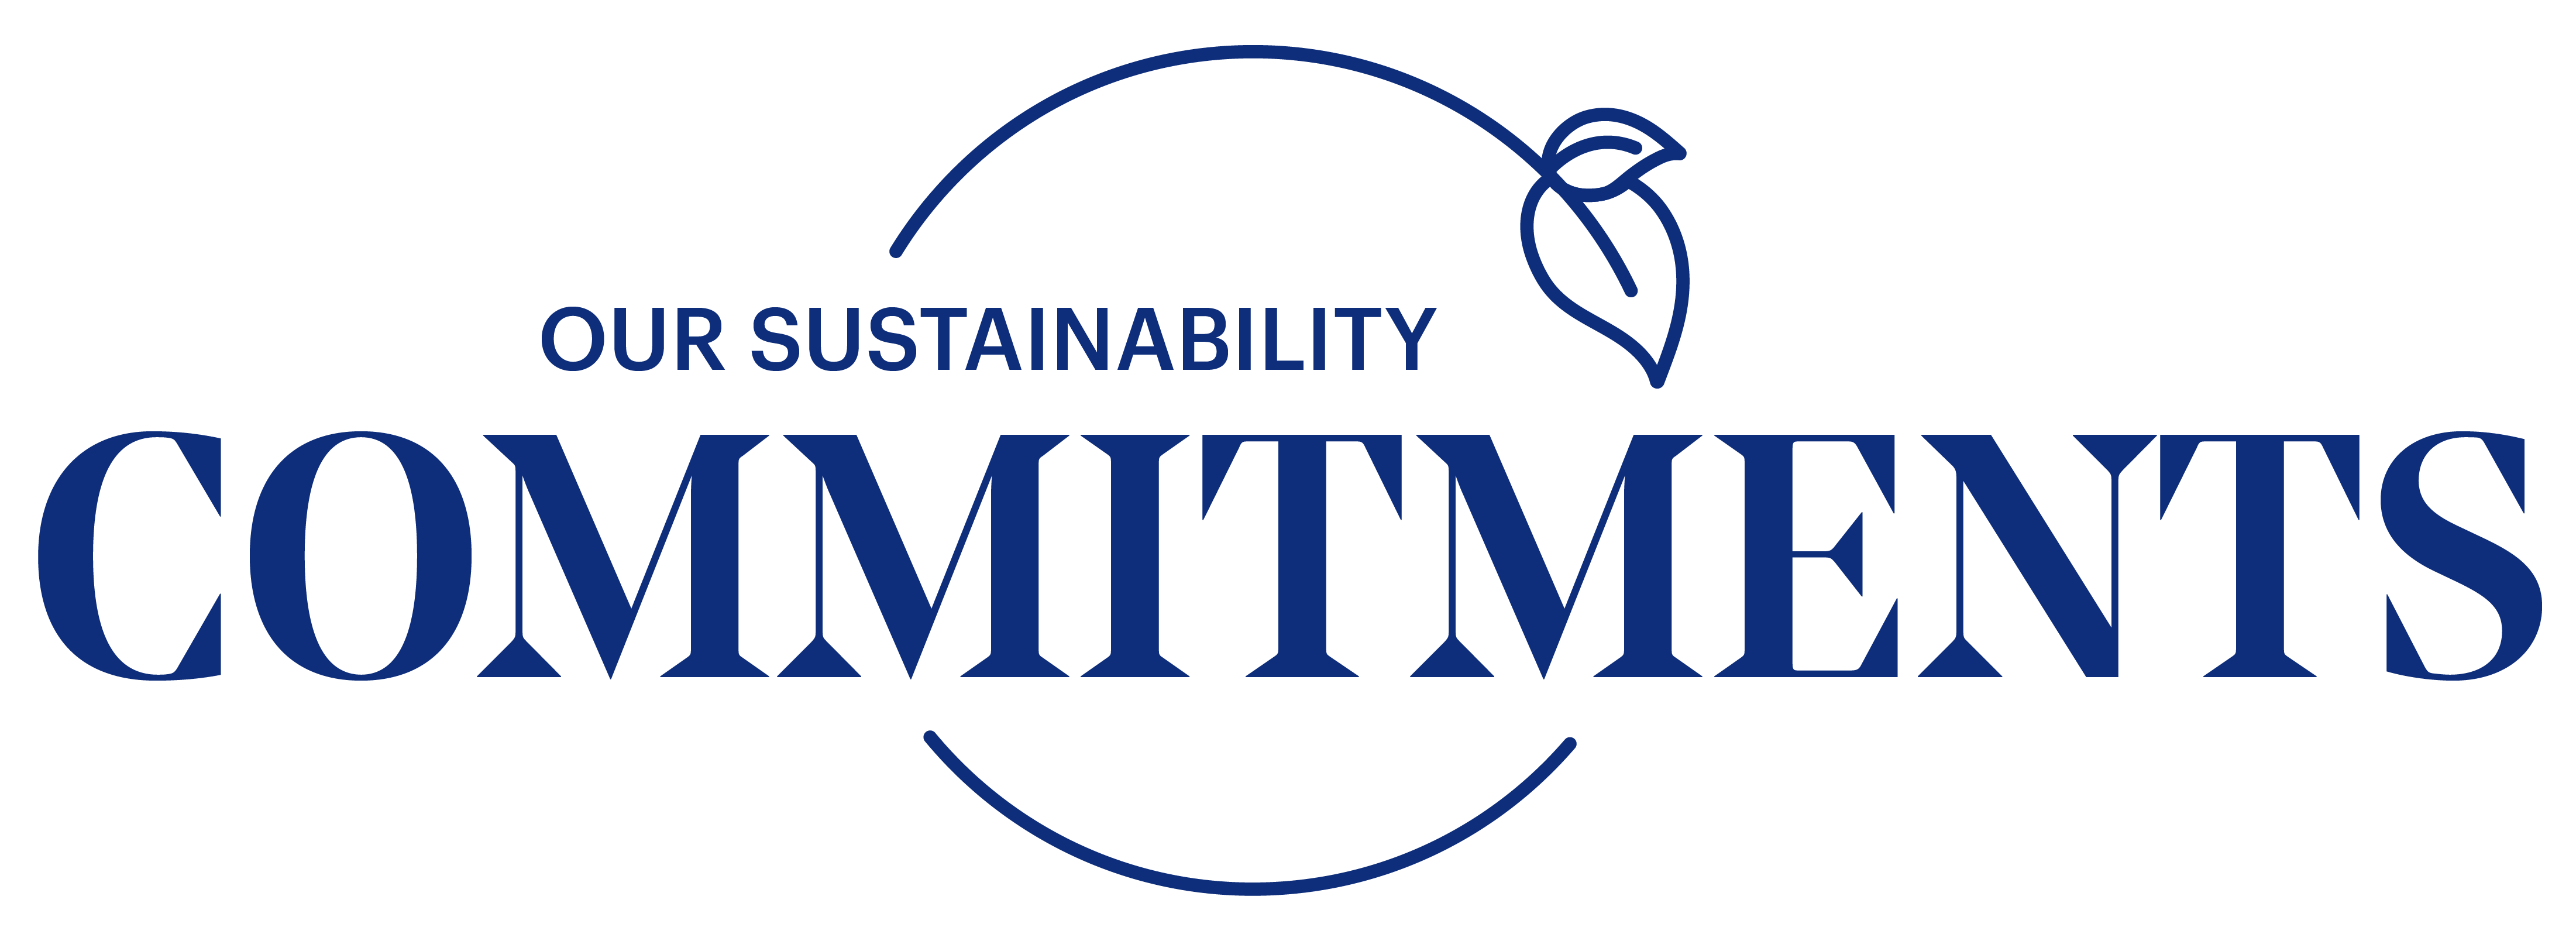 OUR SUSTAINABILITY COMMITMENTS